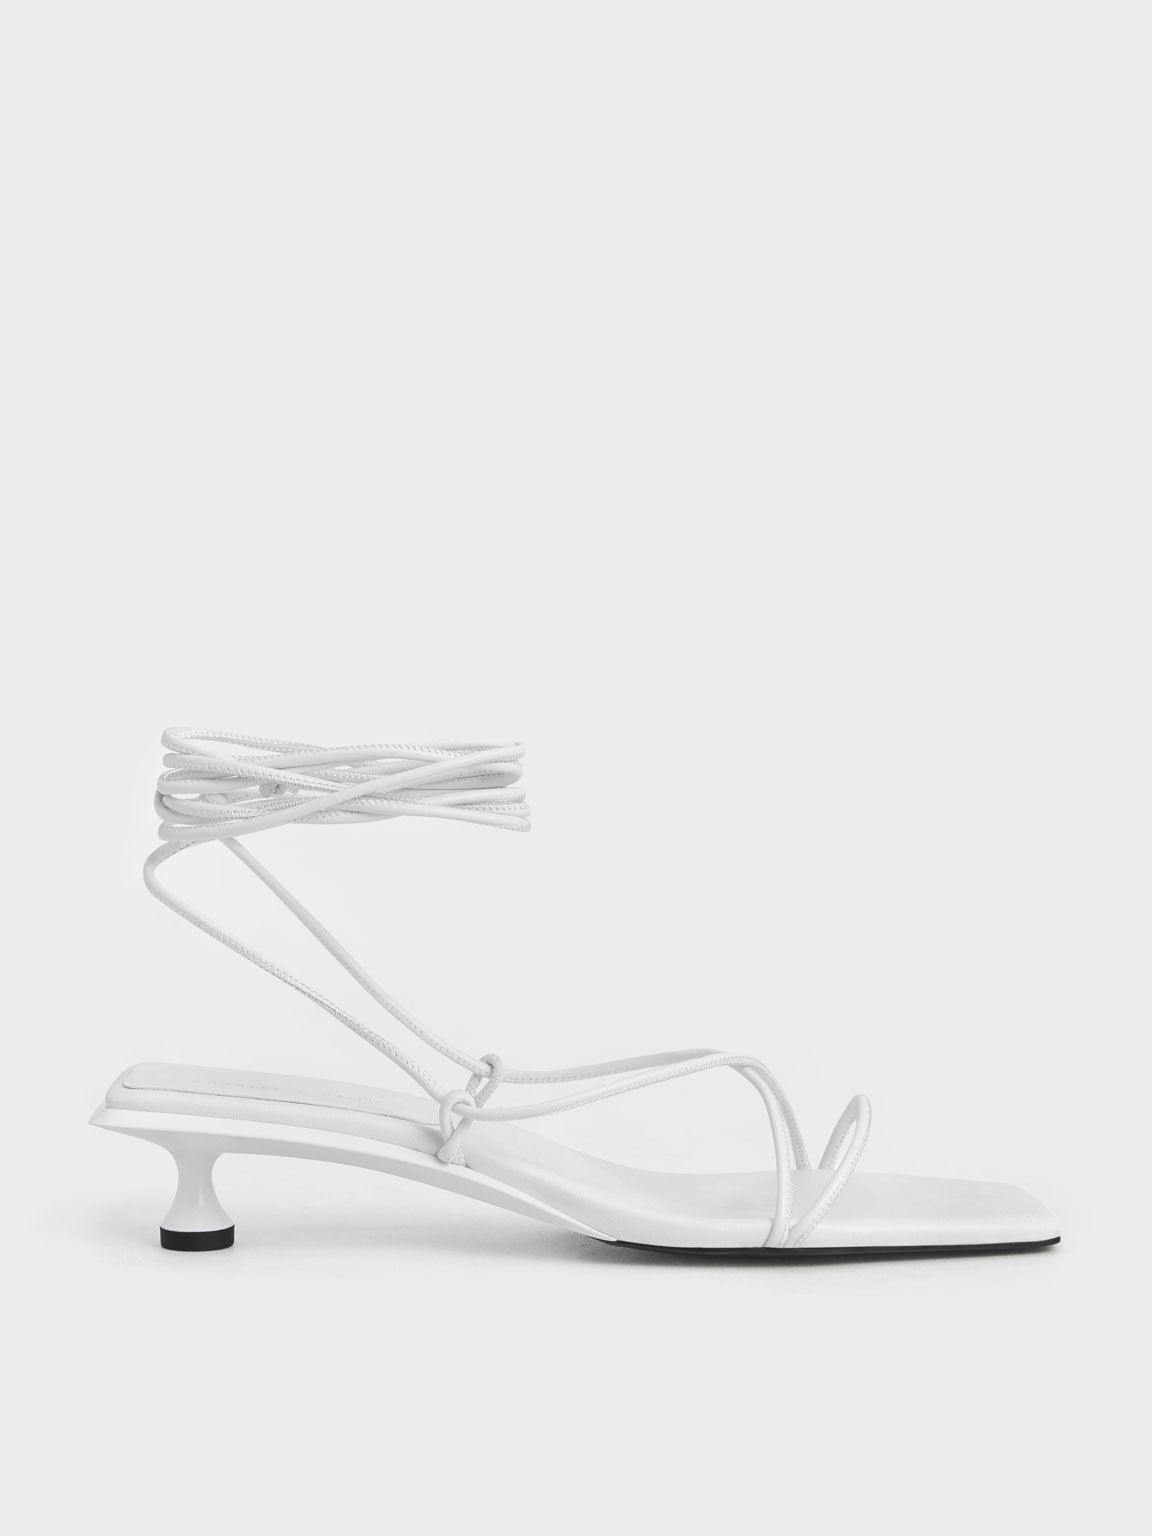 On board Personification Cumulative These 31 Under-$150 Sandals Are Ridiculously Good | Who What Wear